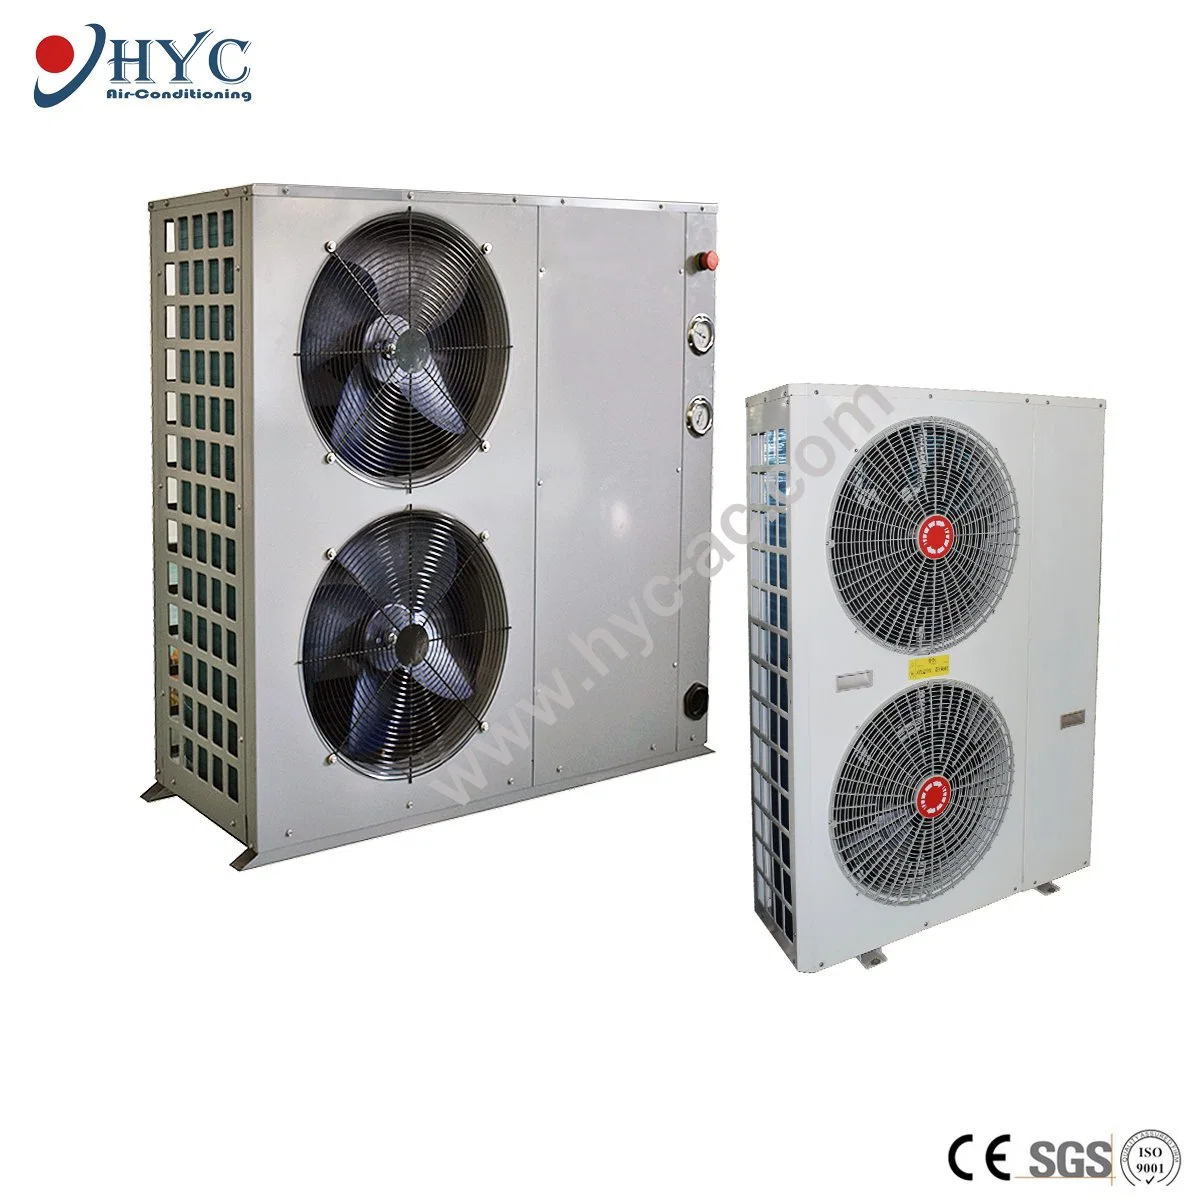 Industrial Air Conditioning Air-Cooled Modular Scroll Cooling-Heating Heat Pump/HVAC Water Chiller System R410A